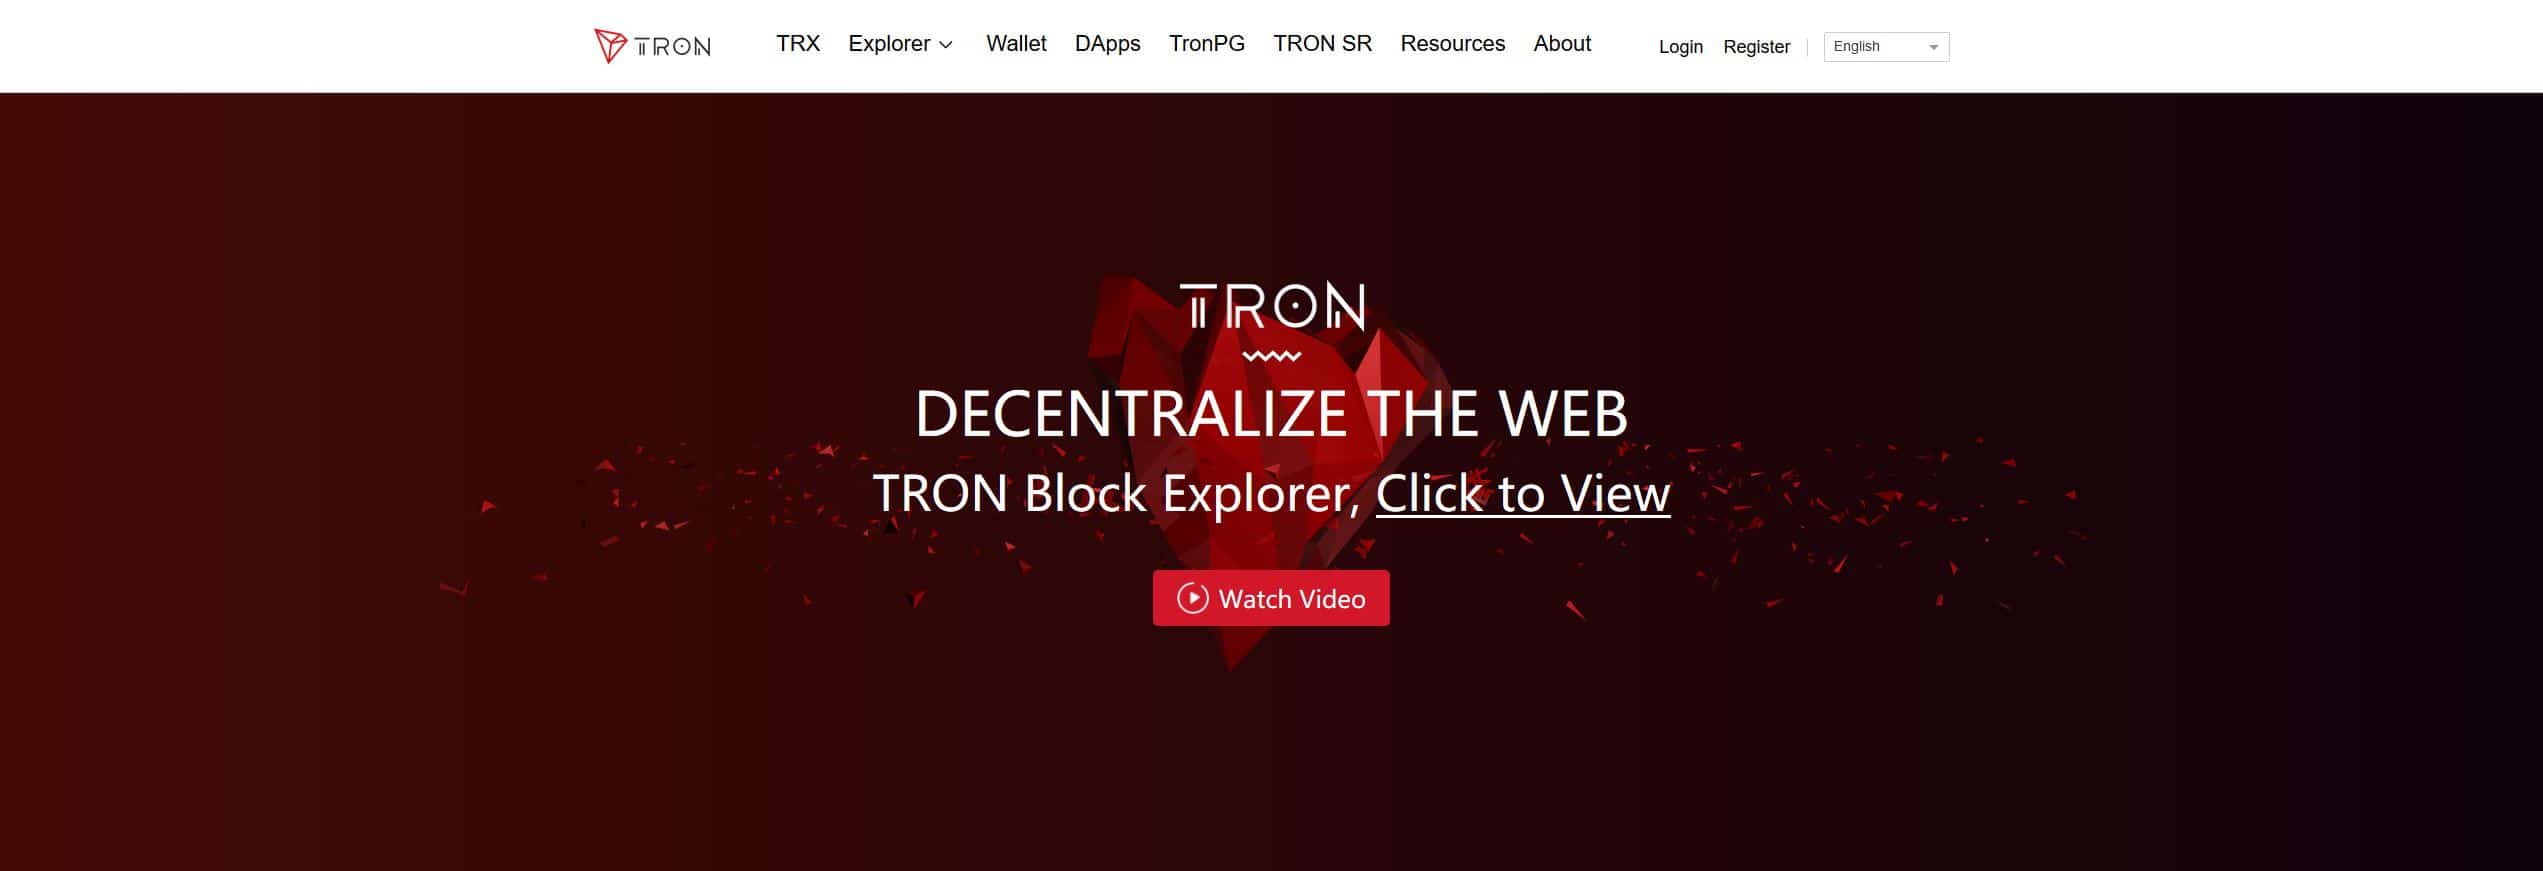 TRON and XRP image